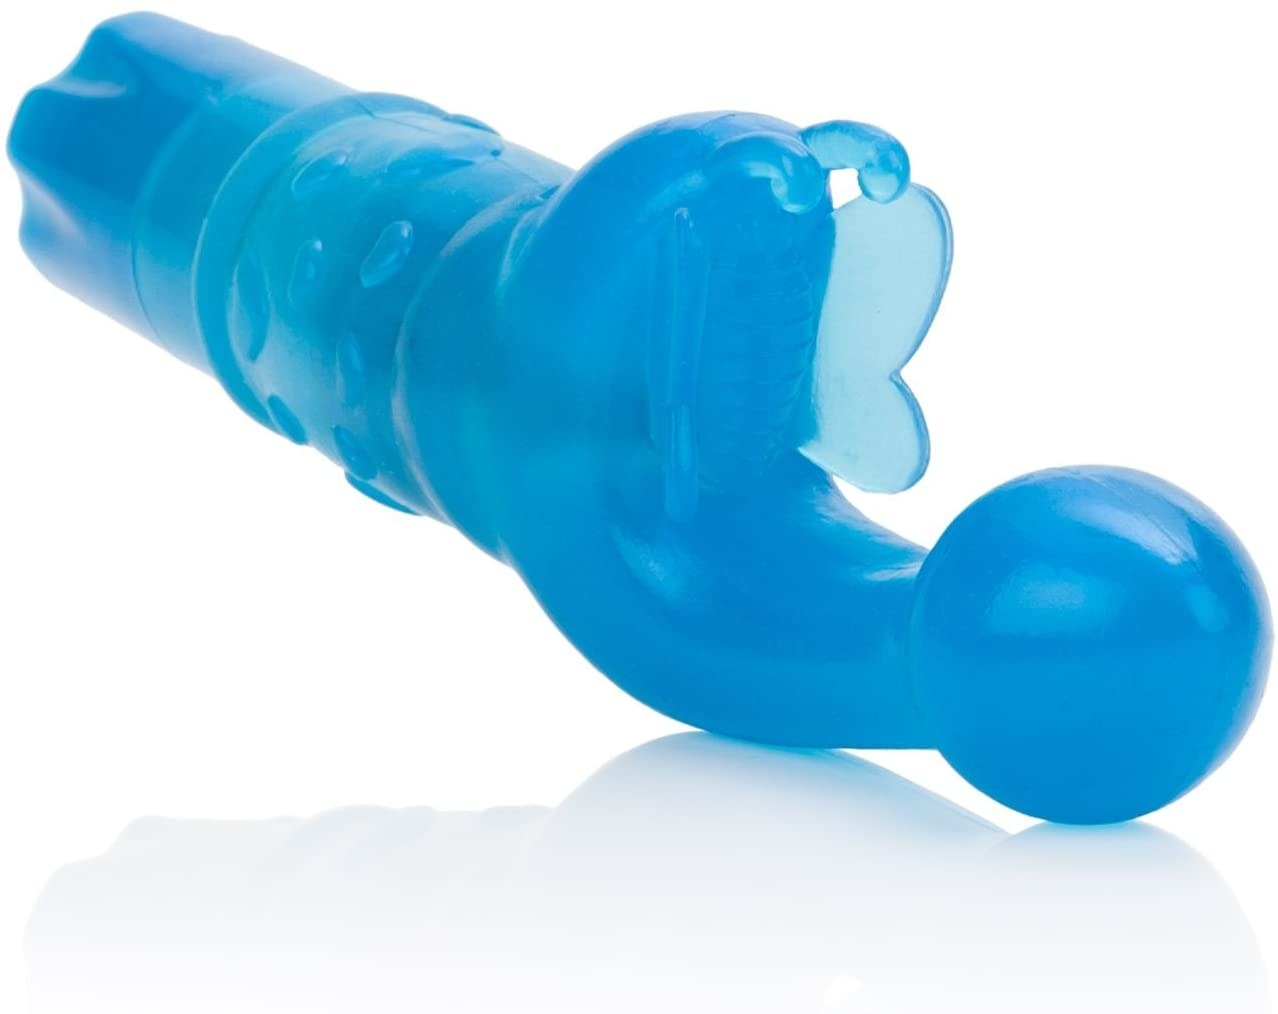 The blue toy with an insertable bulb and butterfly-shaped external stimulation part